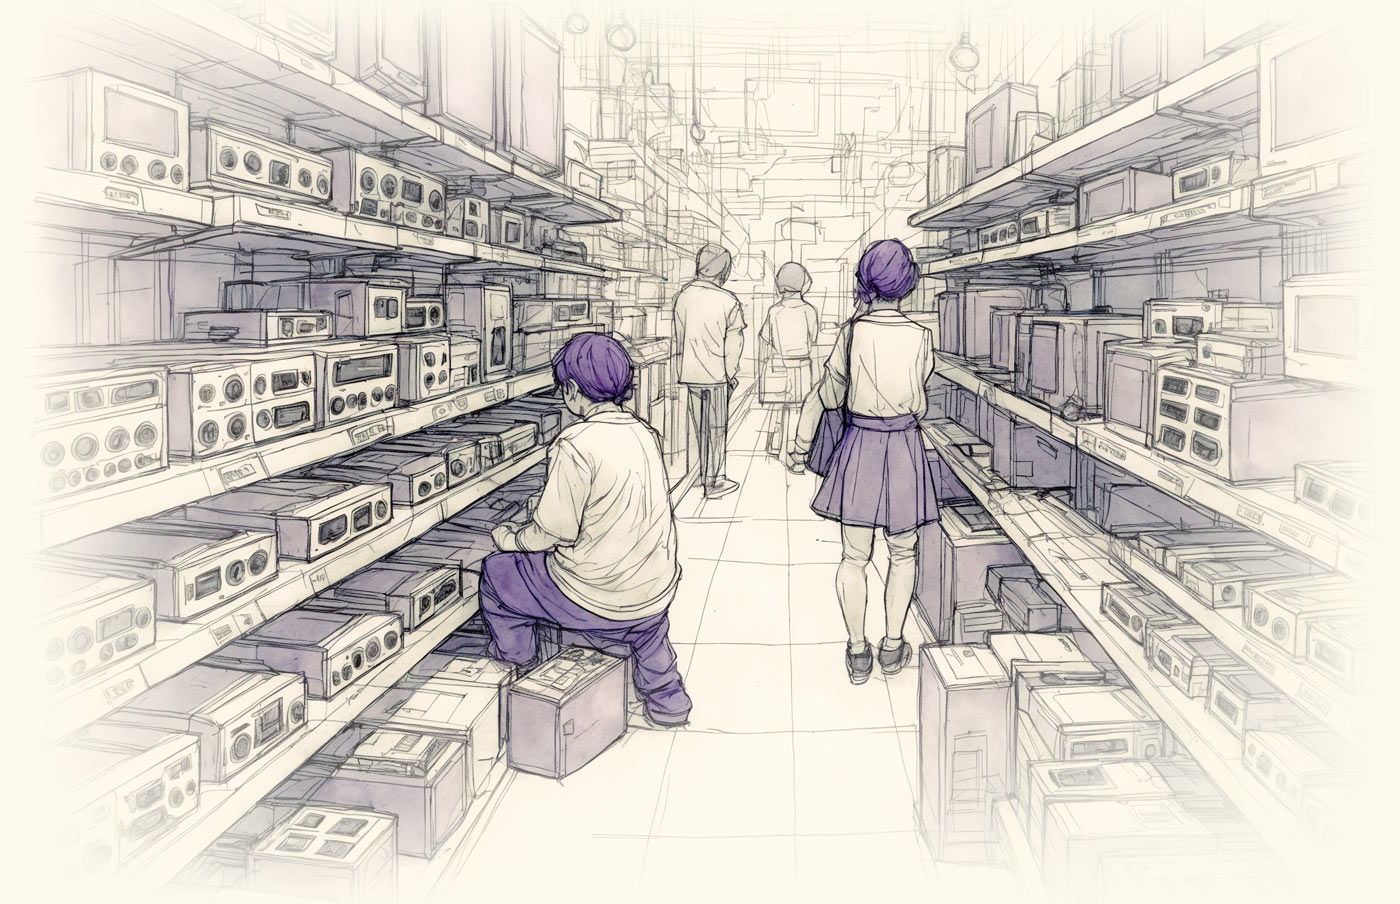 Sketch of an electronics store aisle with customers and shelves lined with various vintage electronic devices, capturing Akihabara's Electric Town ambiance.